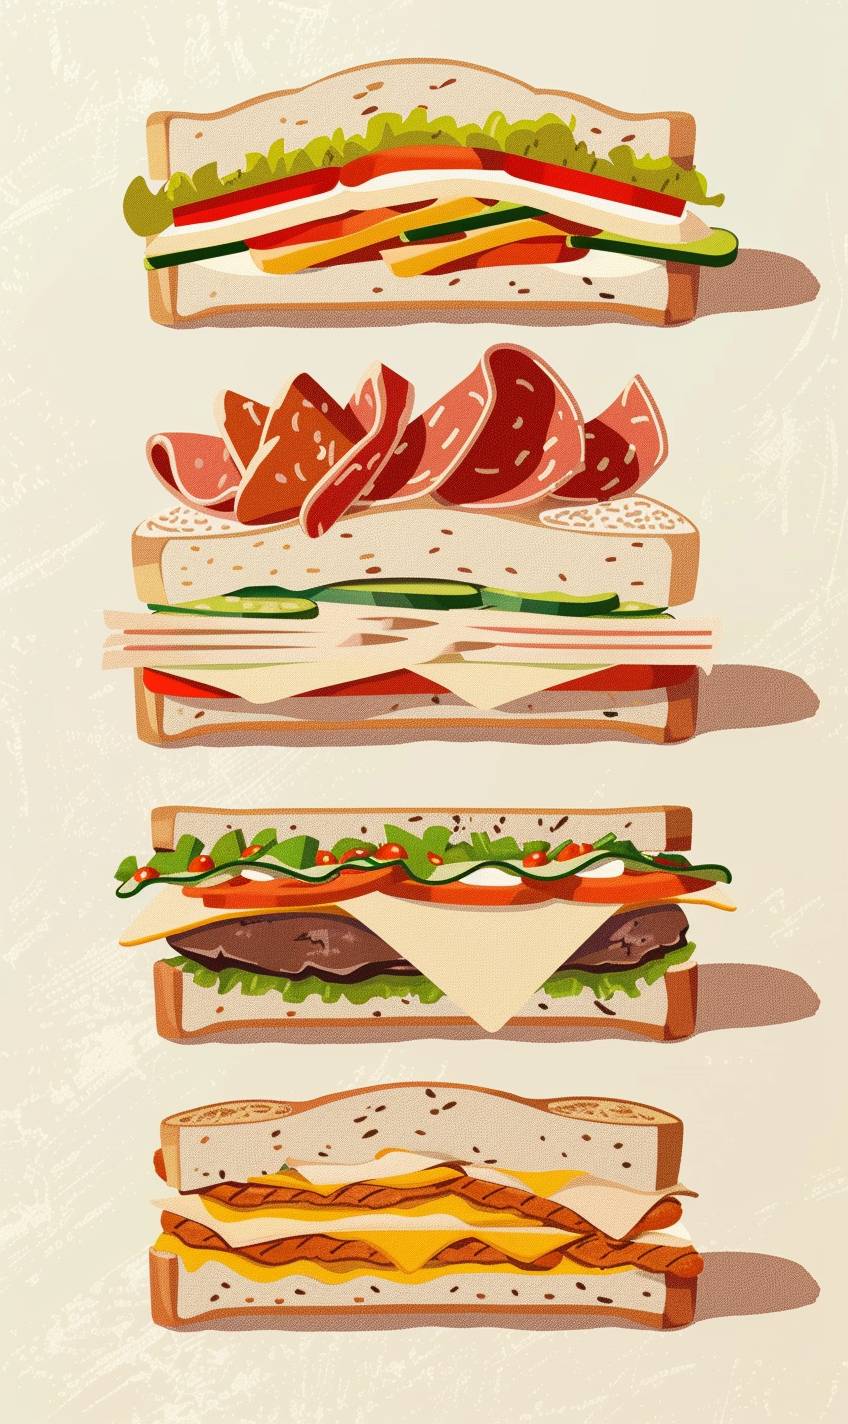 Please create a Milton Glaser style graphic art of meat, chicken, and vegetarian sandwiches all on a light background